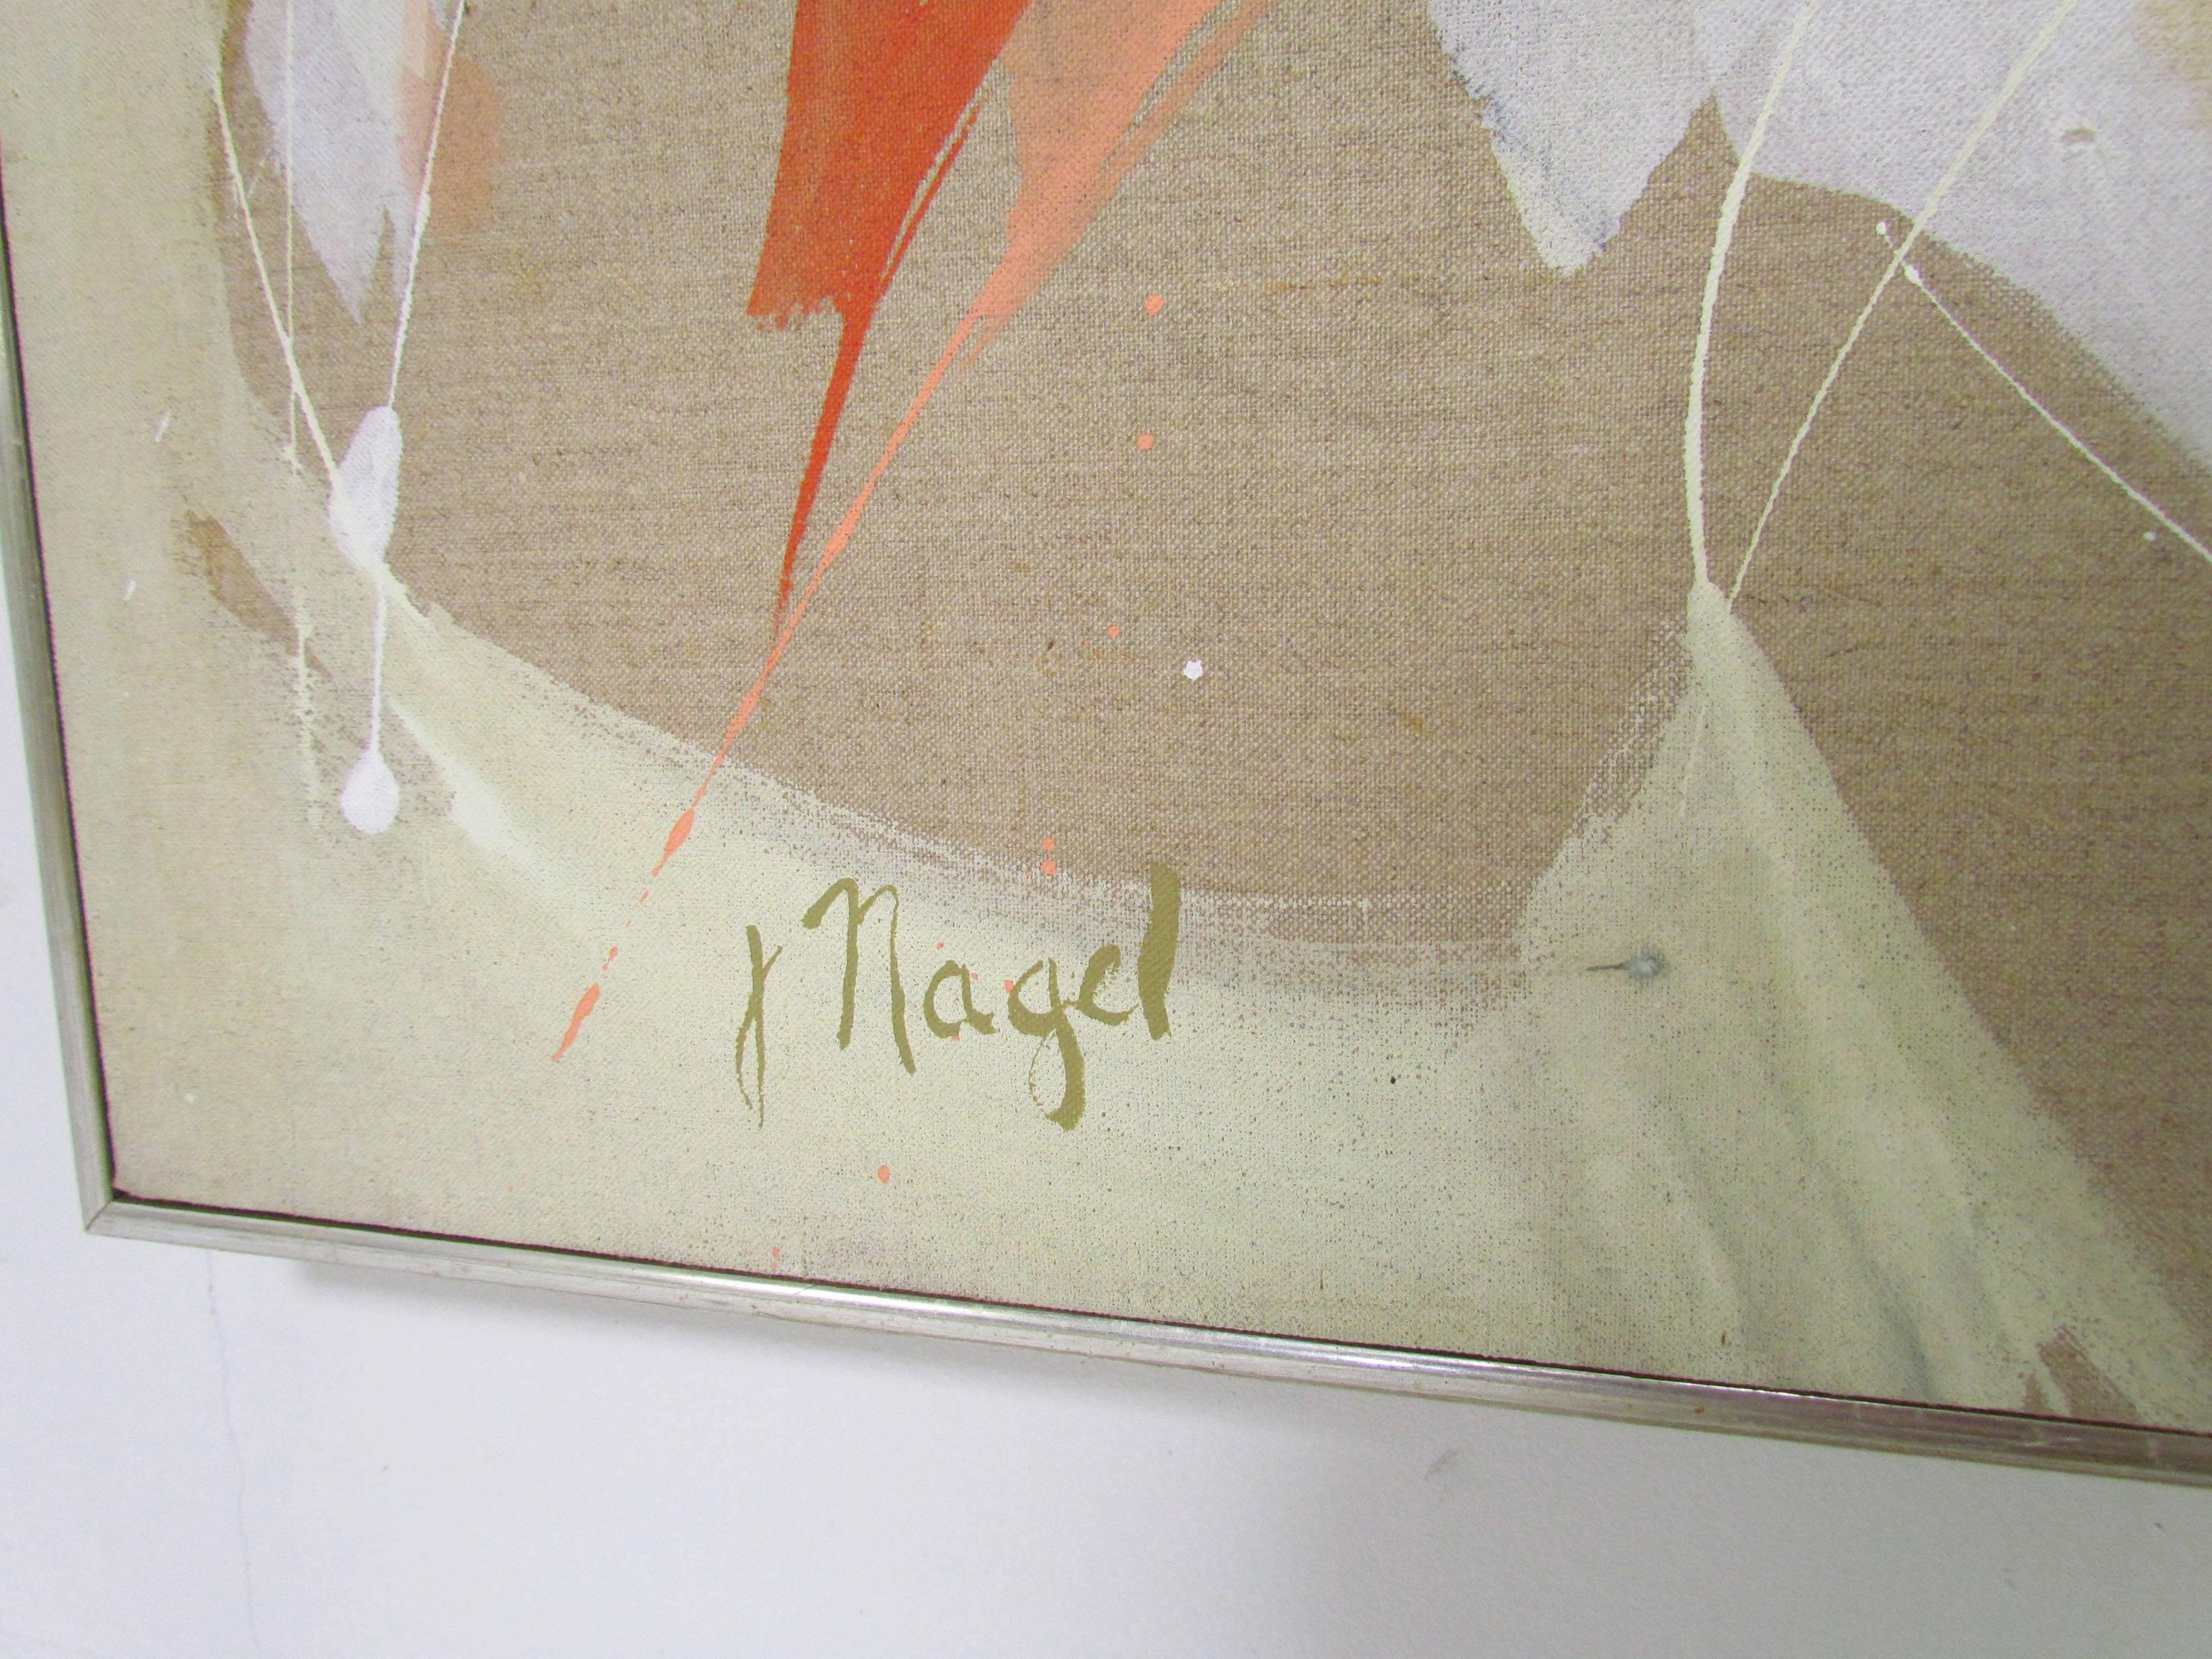 Canvas Large Abstract Painting Signed J. Nagel, circa 1970s